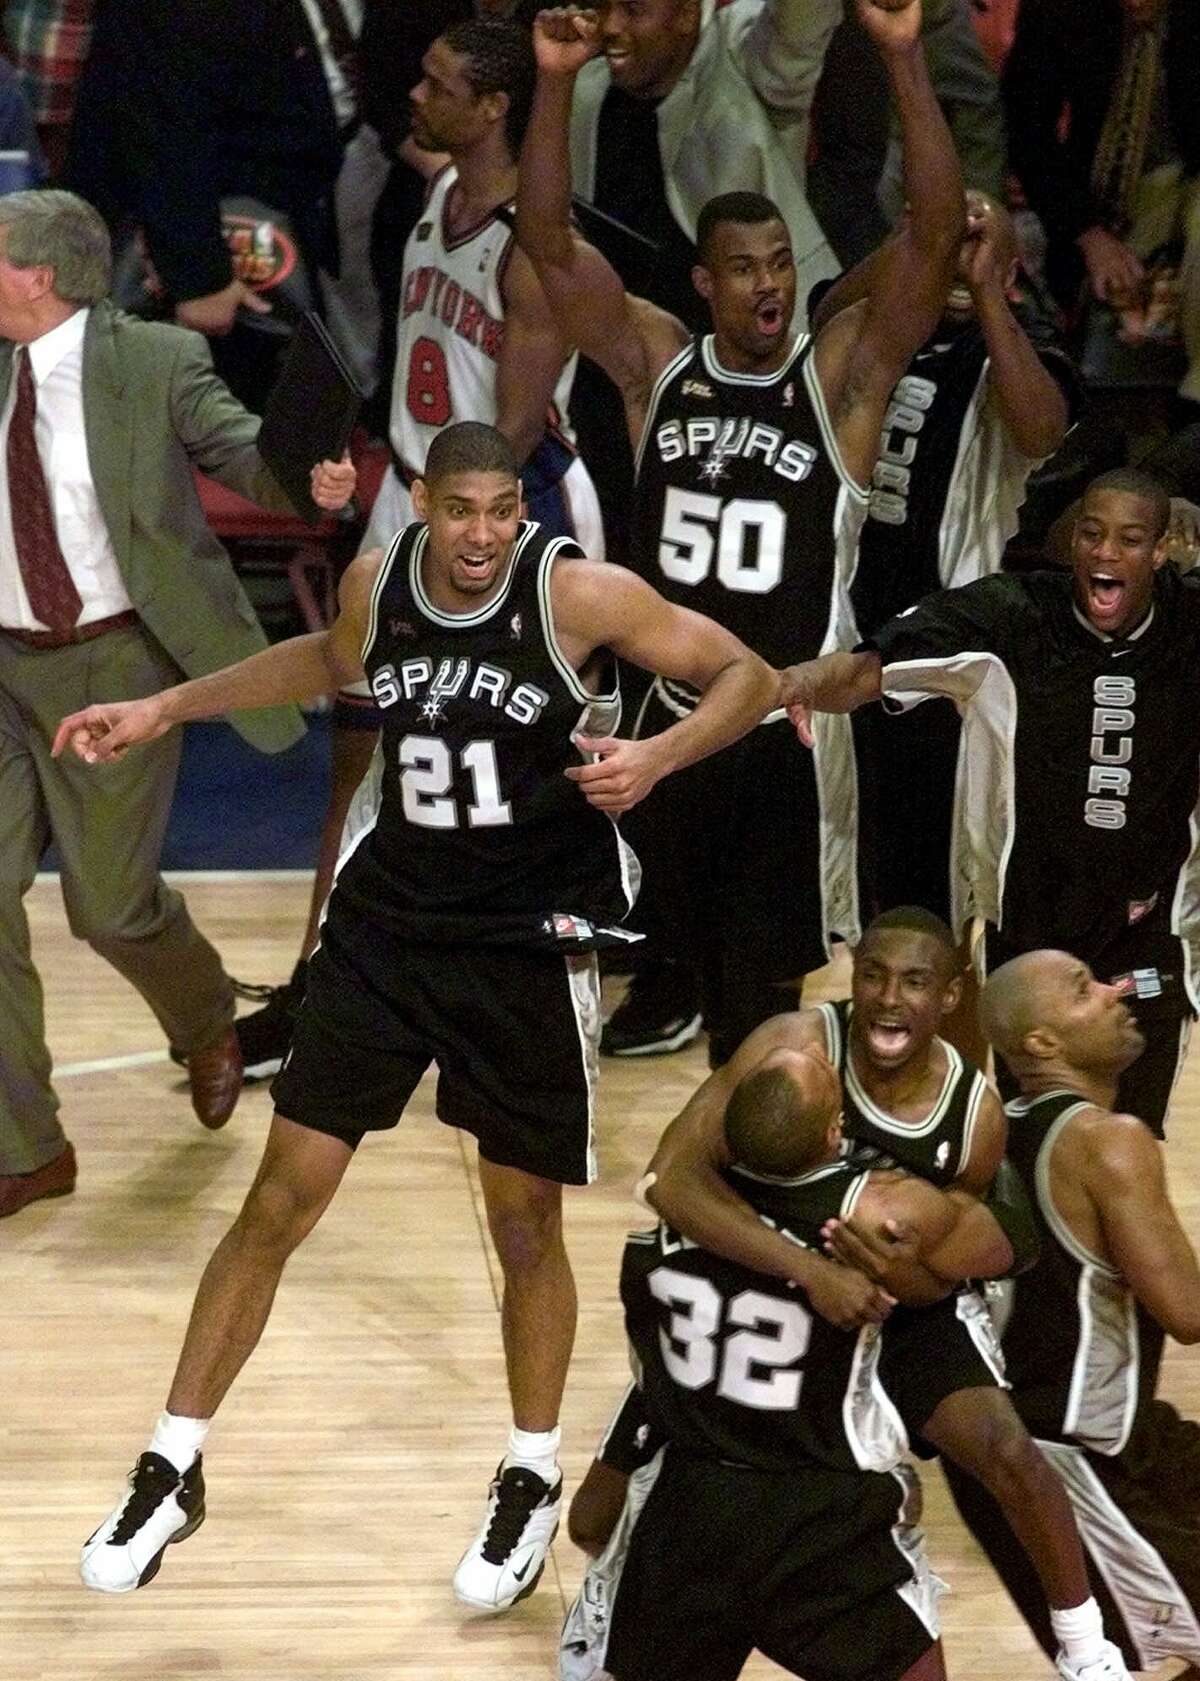 June 25, 1999: Tim Duncan (21), teammates David Robinson (50), Mario Elie, lower right, Antonio Daniels, right rear, Sean Elliott (32), Avery Johnson and Mario Elie celebrate after defeating the New York Knicks 78-77 in Game 5 of the clinch the 1999 NBA Finals. (AP Photo/Mark Lennihan)